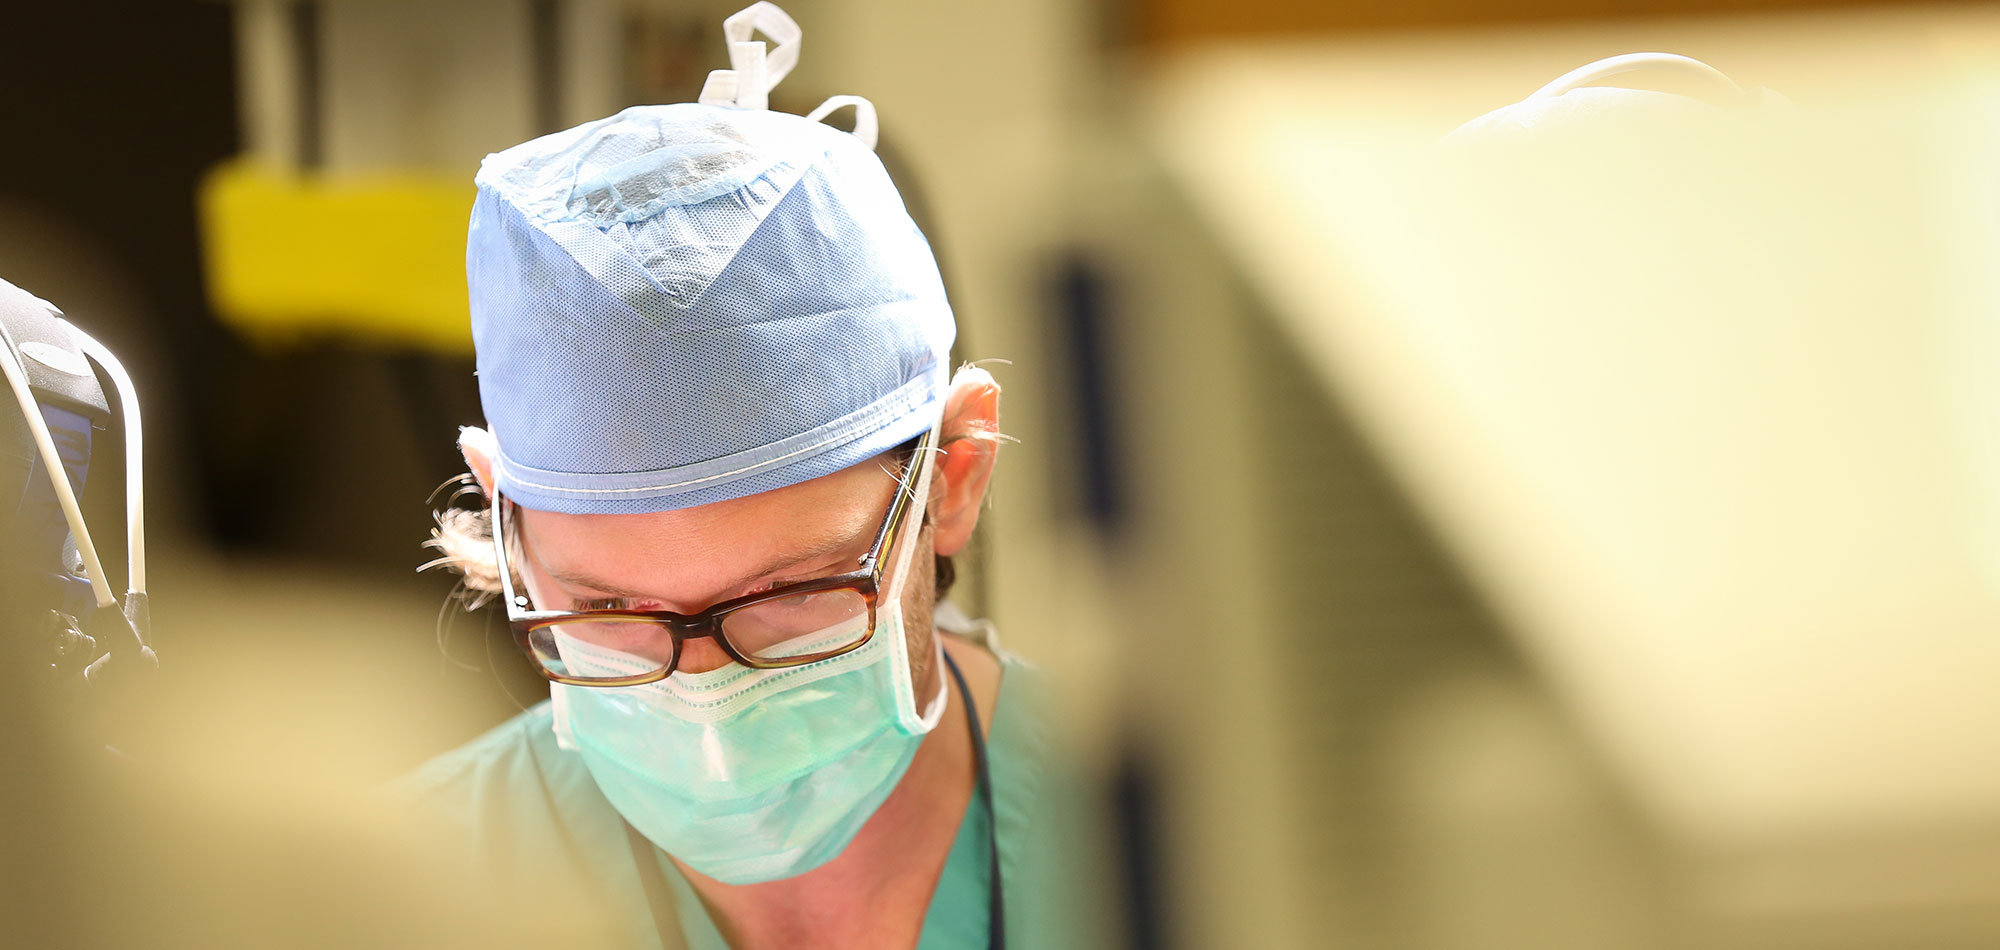 Brad Zacharia, MD, MS, assistant professor of neurosurgery, is seen in the operating room in 2015. He is wearing a mask, hair covering and scrubs.